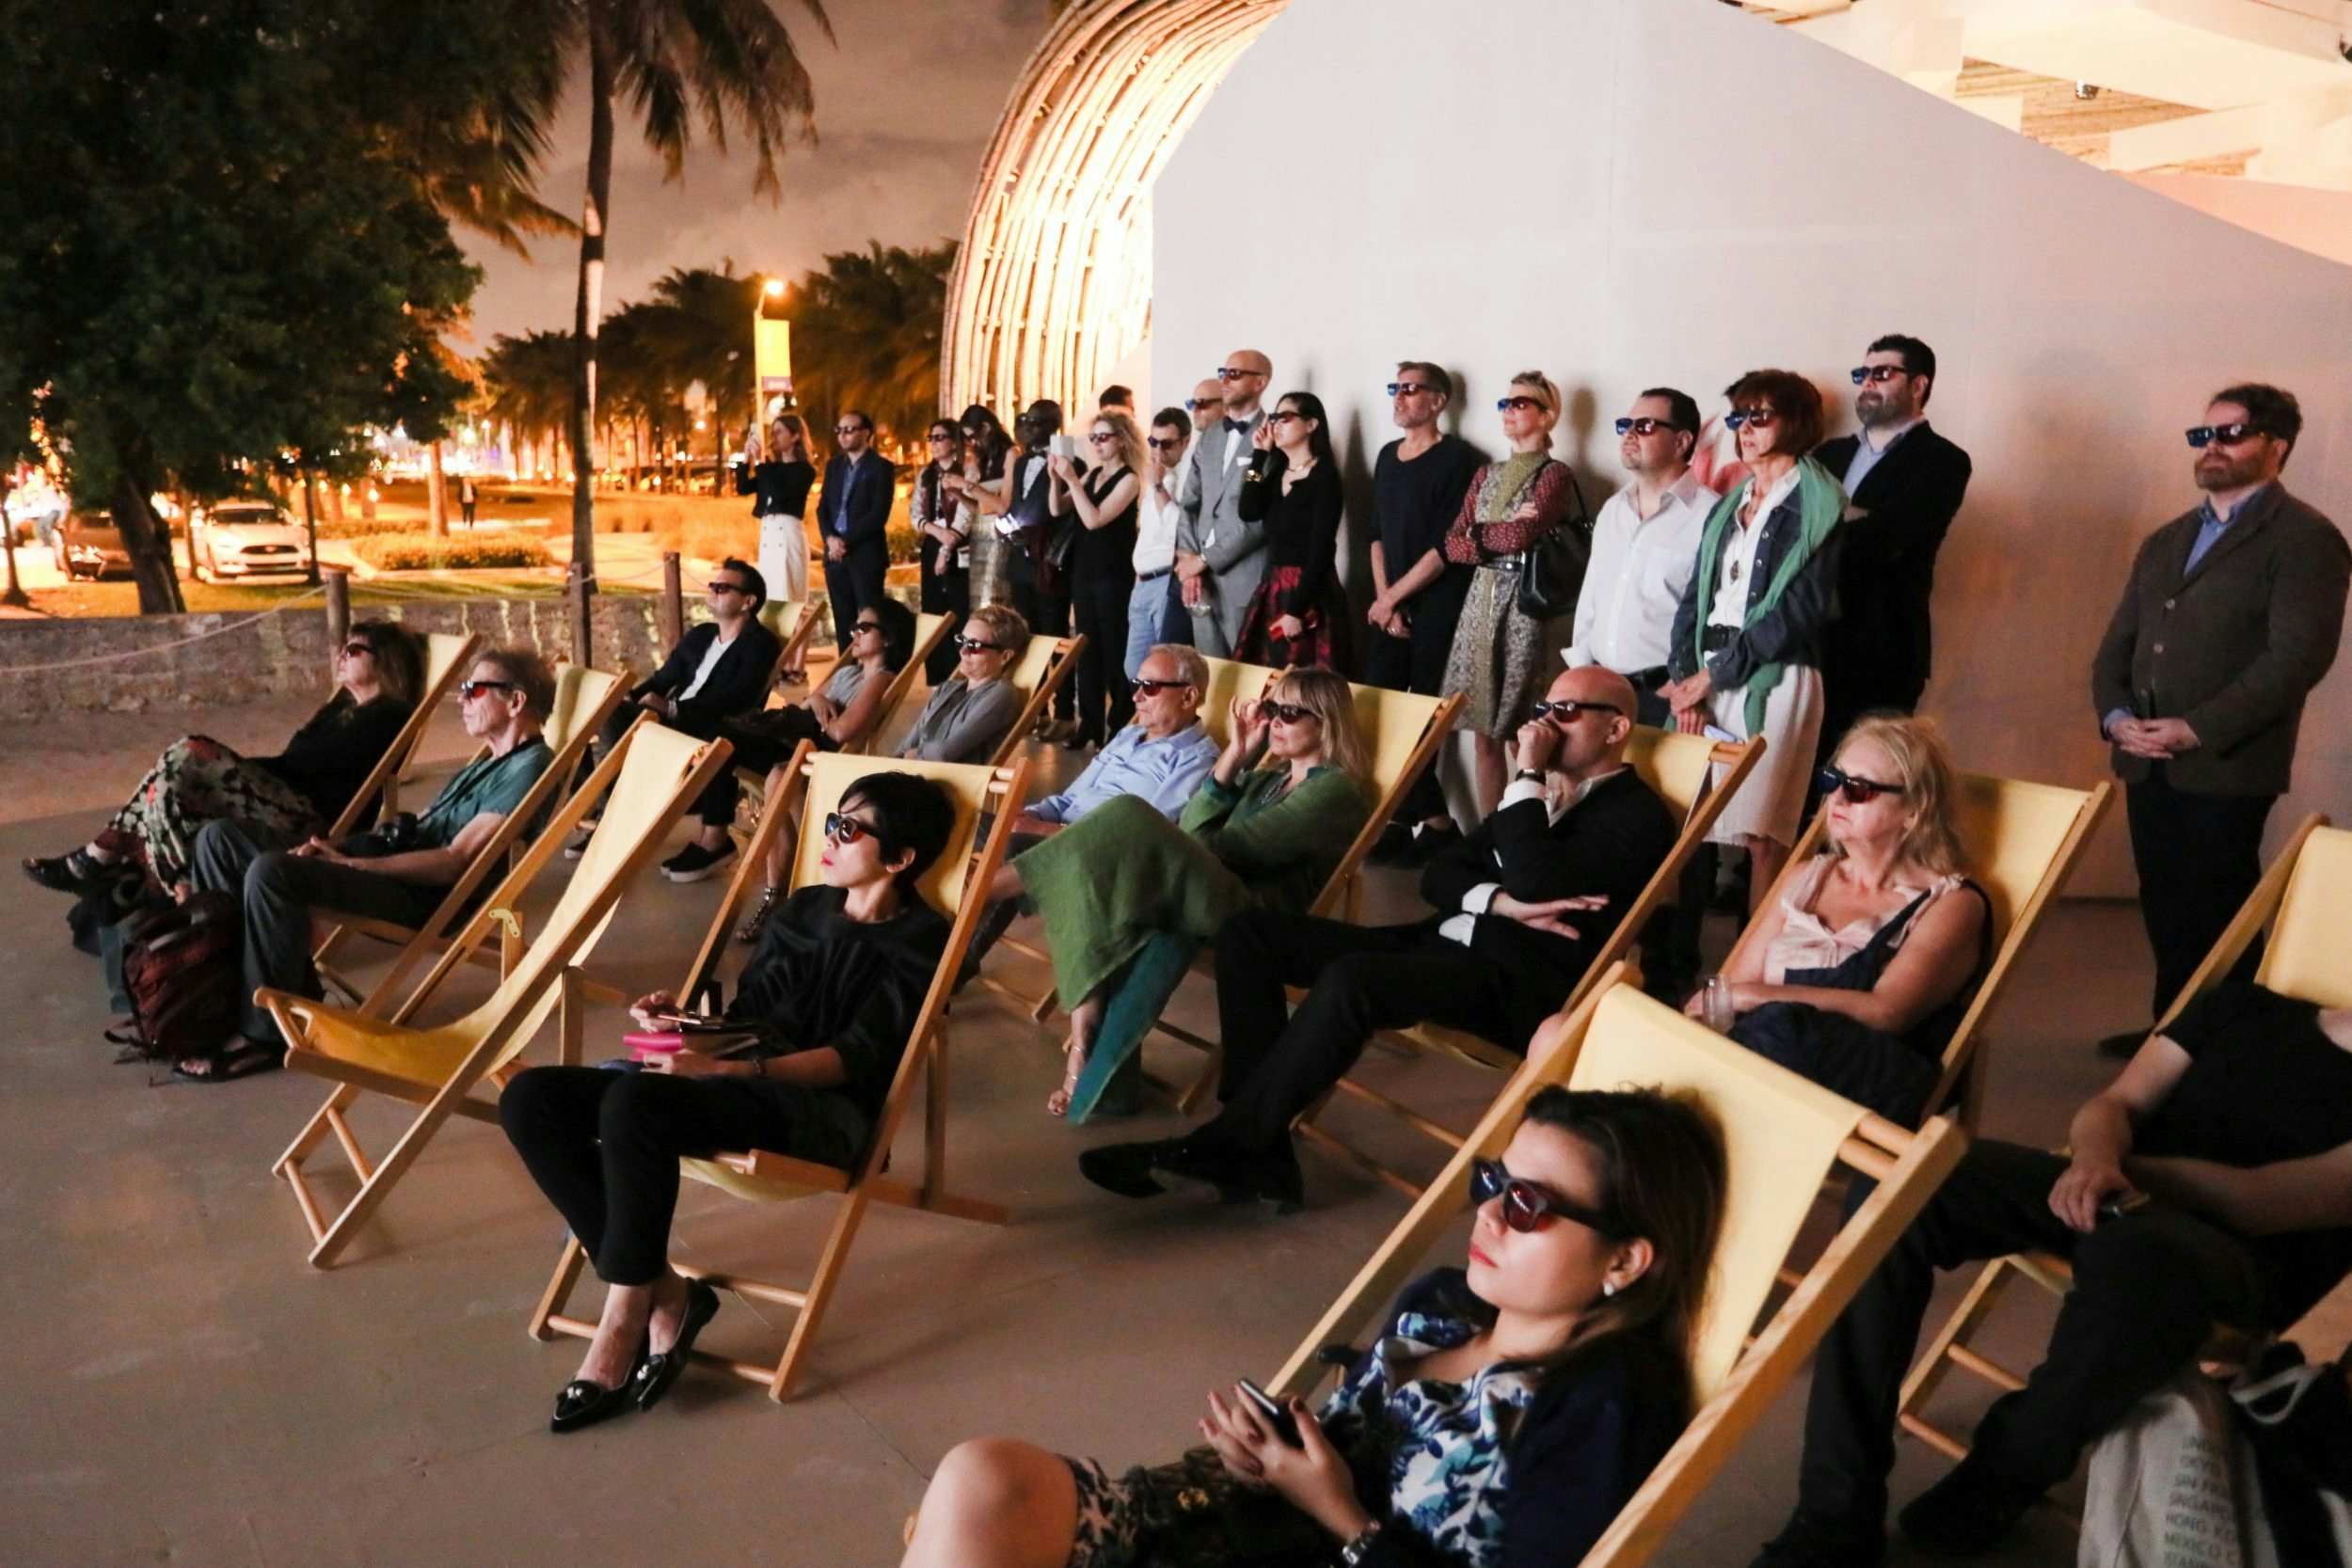 Audience members view Chinese contemporary artist Sun Xun's 3D presentation at an unveiling during Art Basel Miami. (Courtesy Photo)